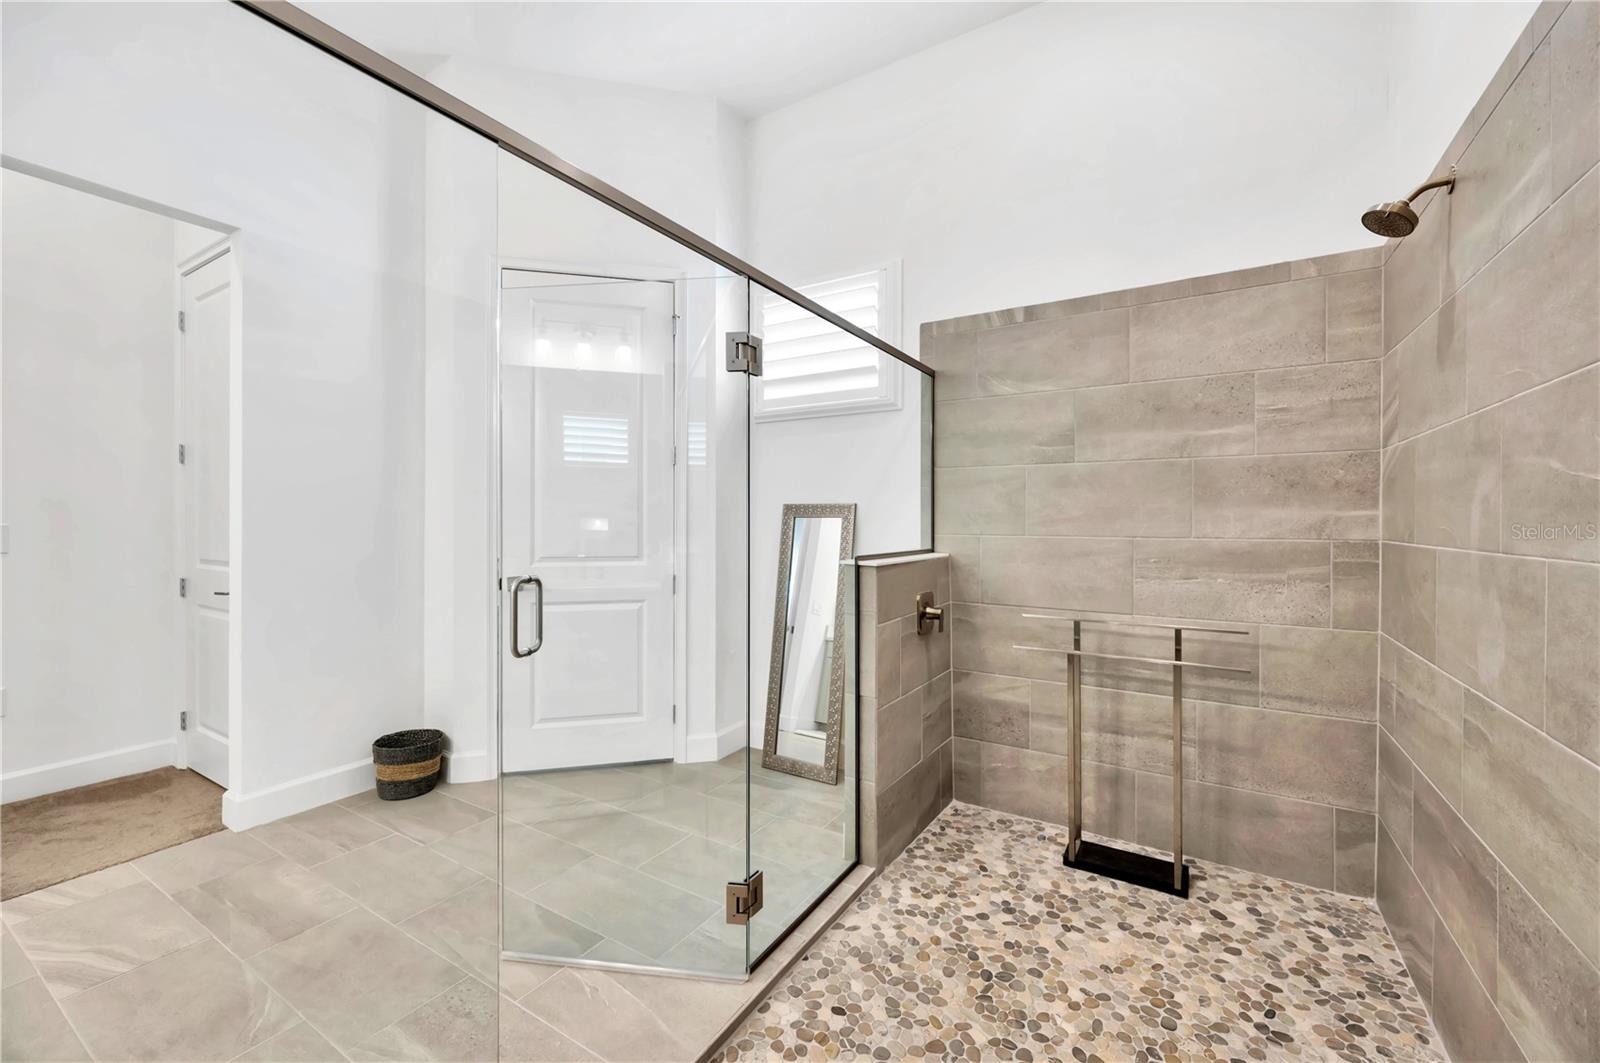 Can you believe the size of the Owner's Walk-In Shower?